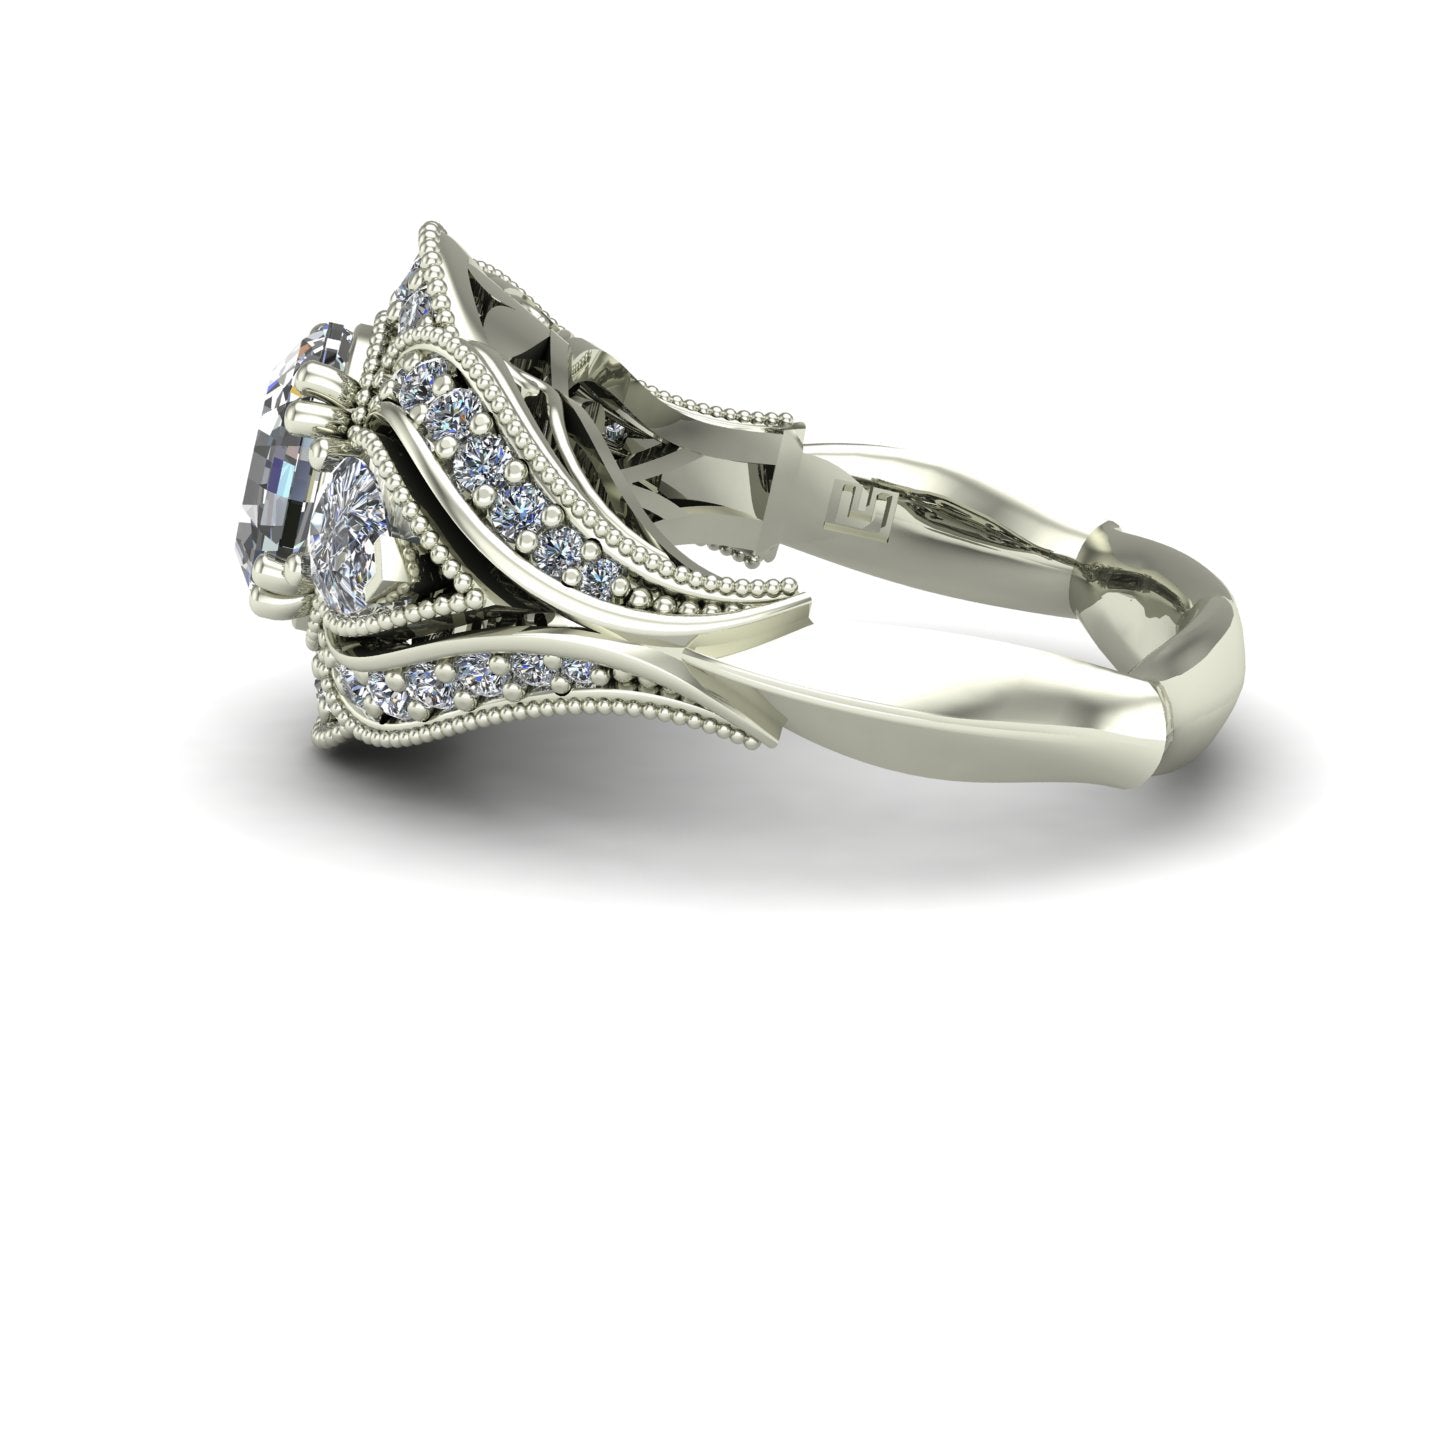 Oval and pear diamond engagement ring in 18k white gold - Charles Babb Designs - side view